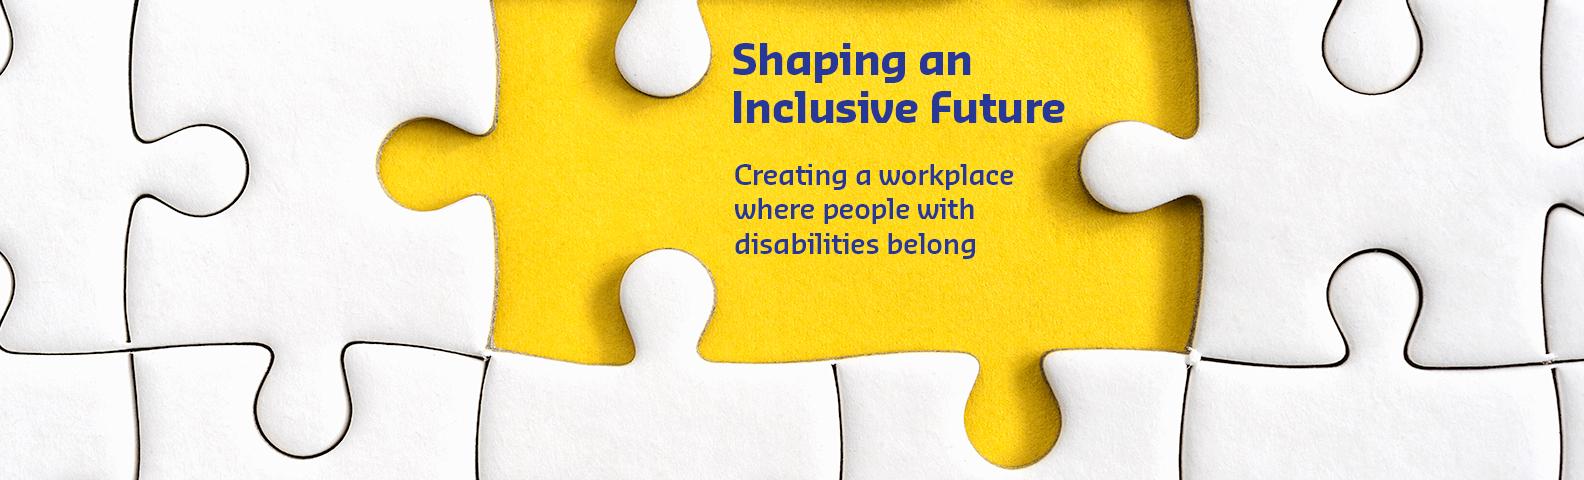 Shaping an inclusive future - Creating a workplace where people with disabilities belong